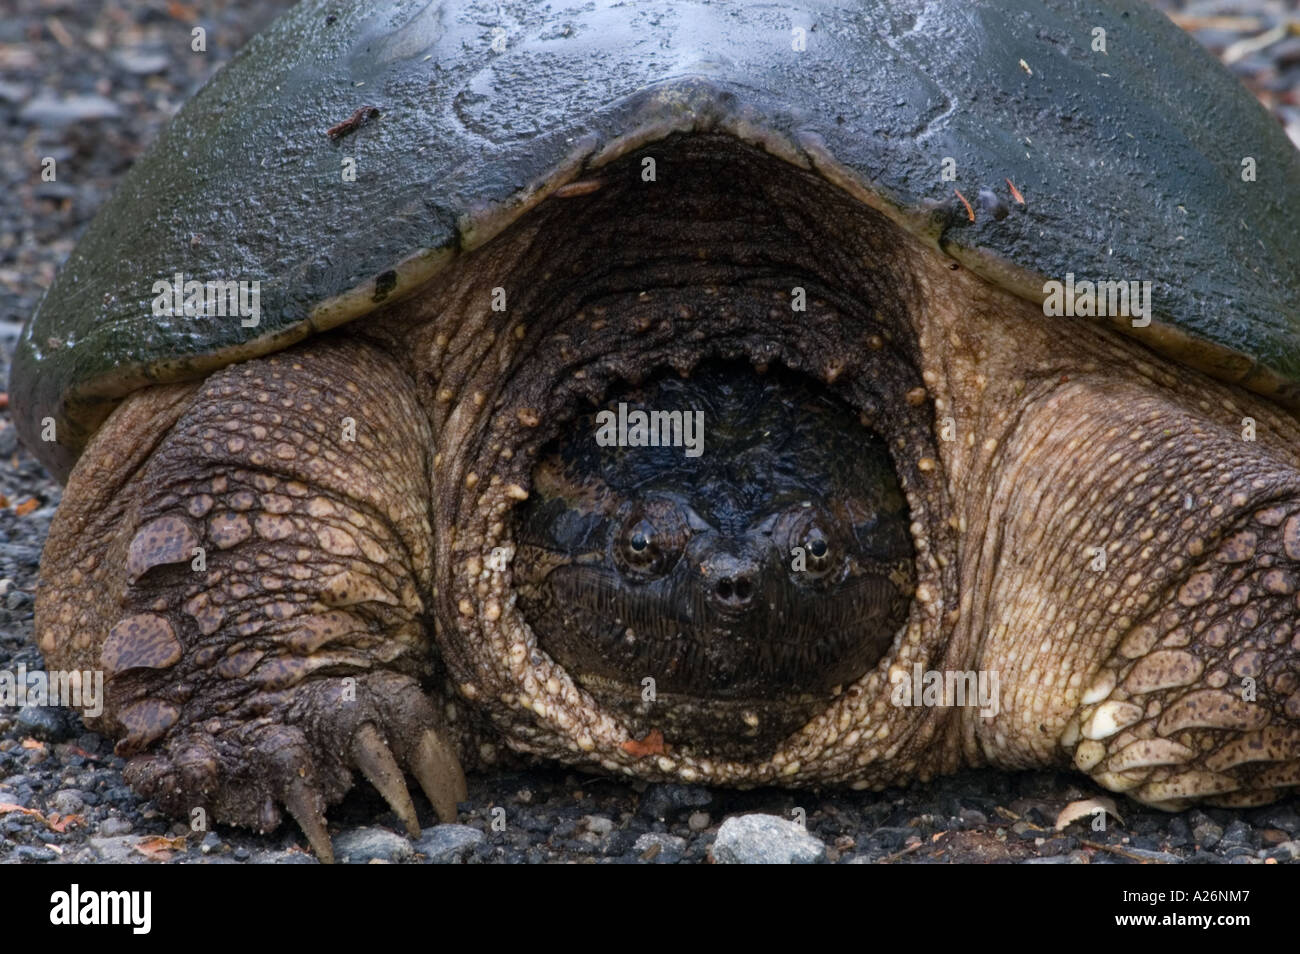 Snapping turtle (Chelydra serpentina) Female in roadside gravel laying eggs. Stock Photo